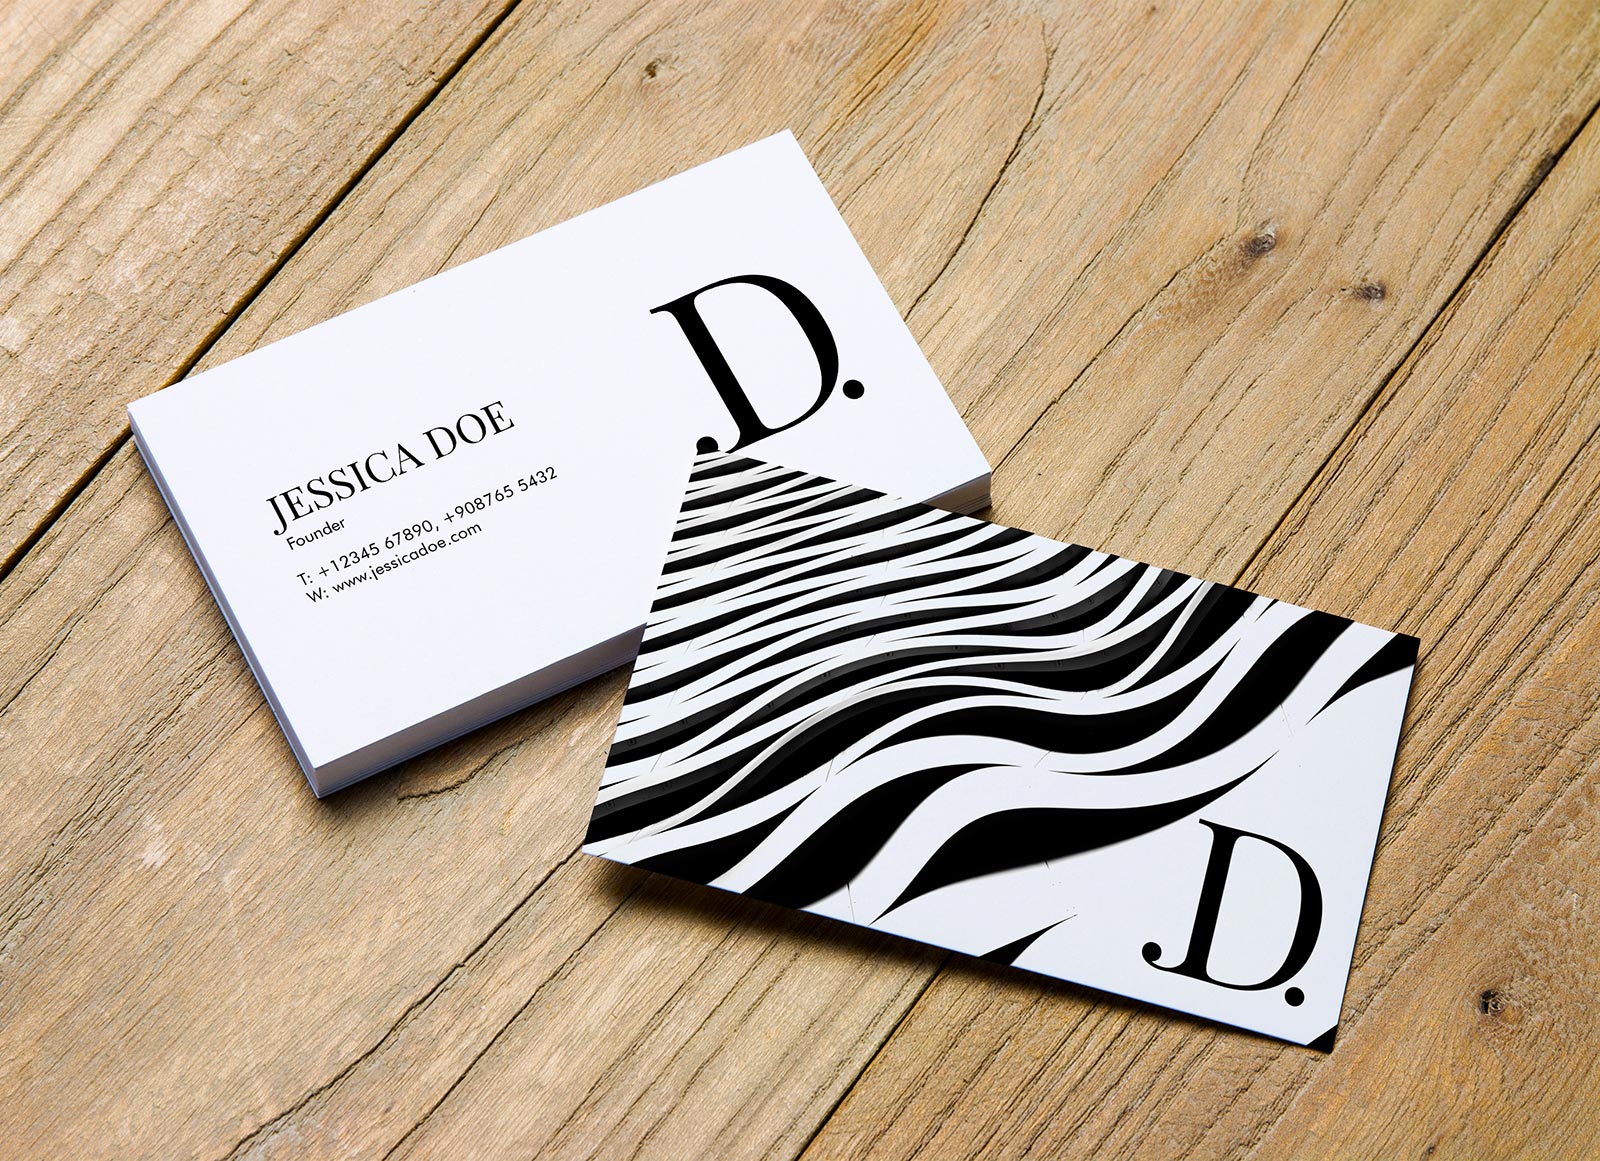 photoshop business card mockup free download